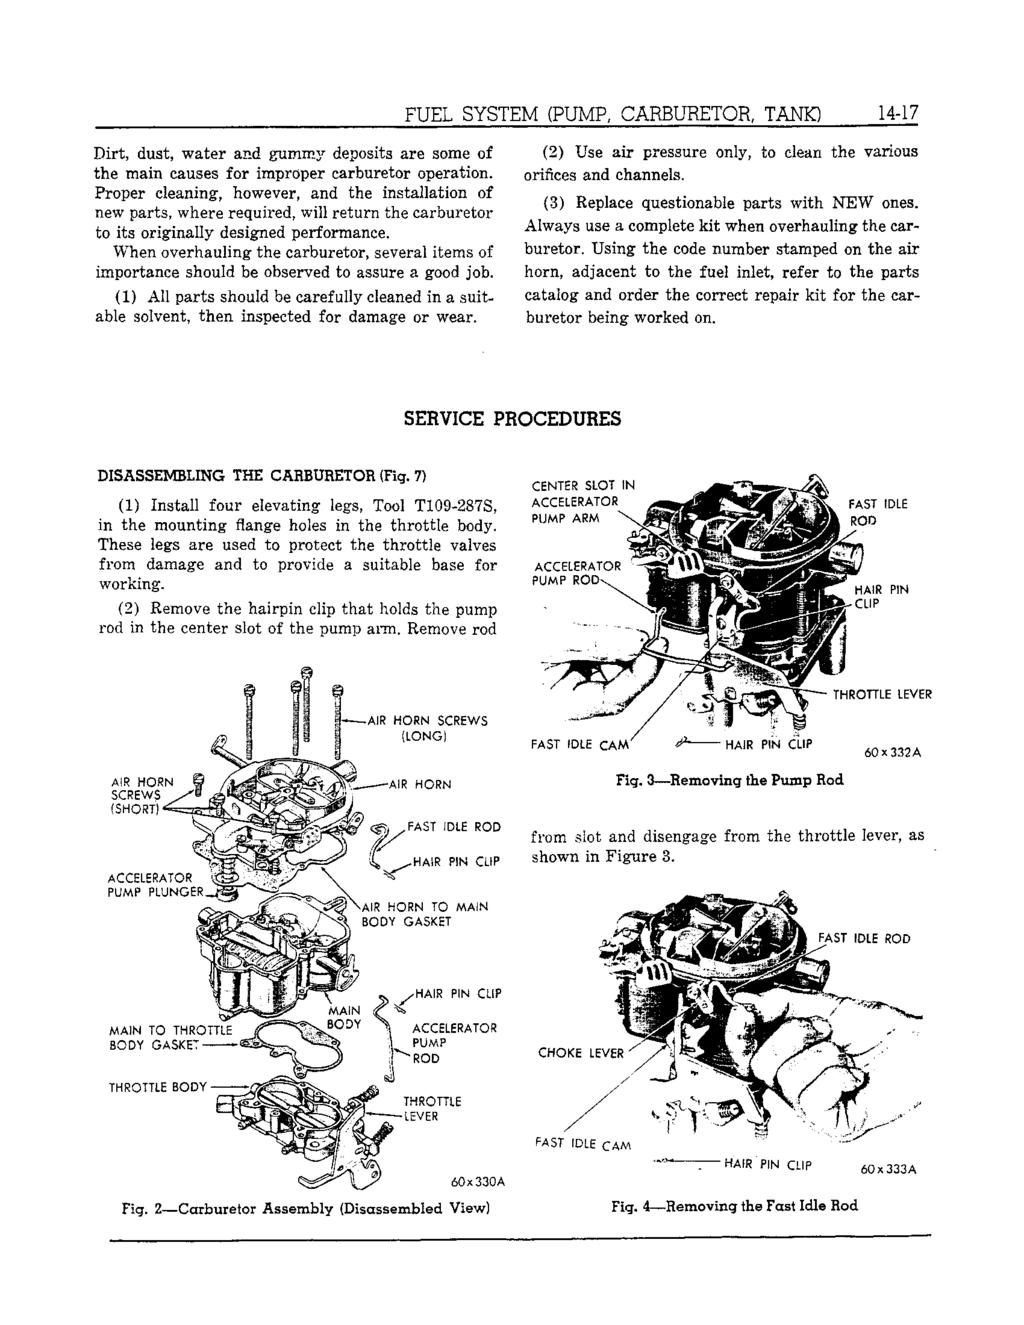 FUEL SYSTEM (PUMP, CARBURETOR, TANK) 1447 Dirt, dust, water and gummy deposits are some of the main causes for improper carburetor operation.